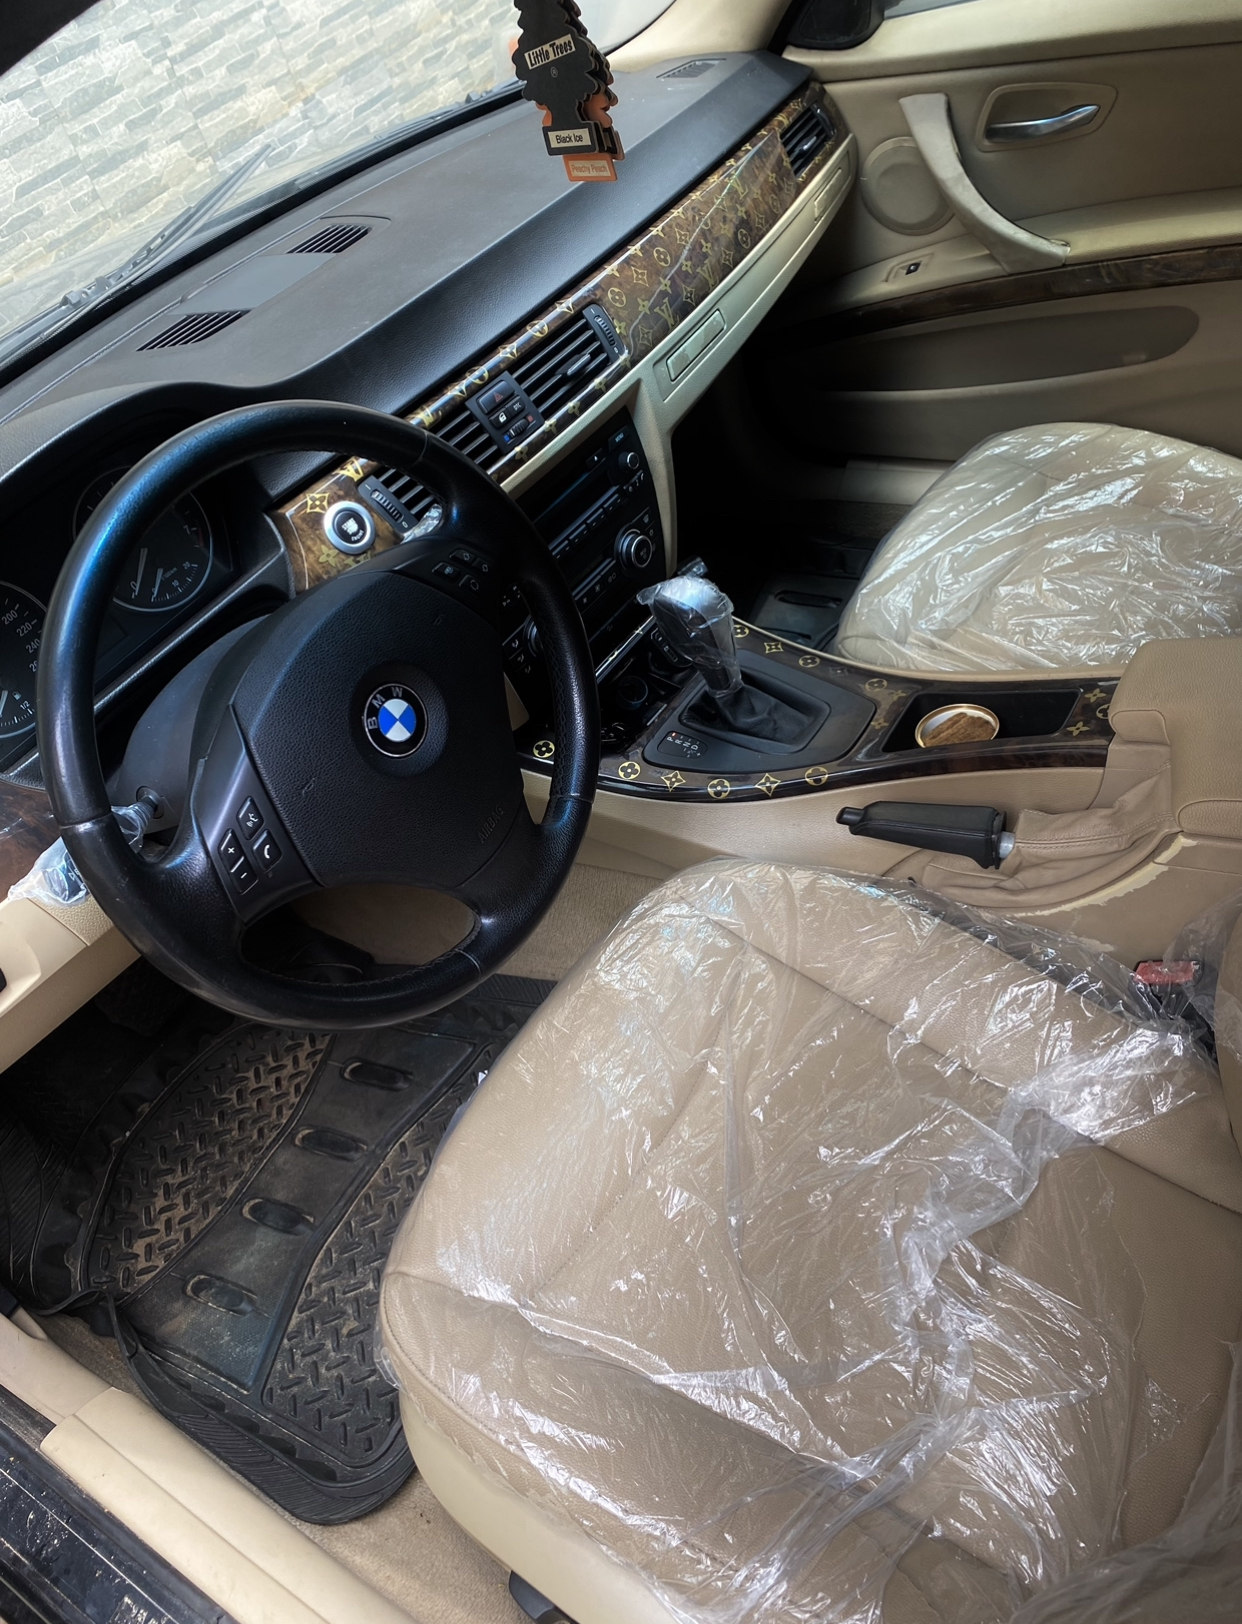 Buy 2007 foreign-used Bmw 328i Lagos